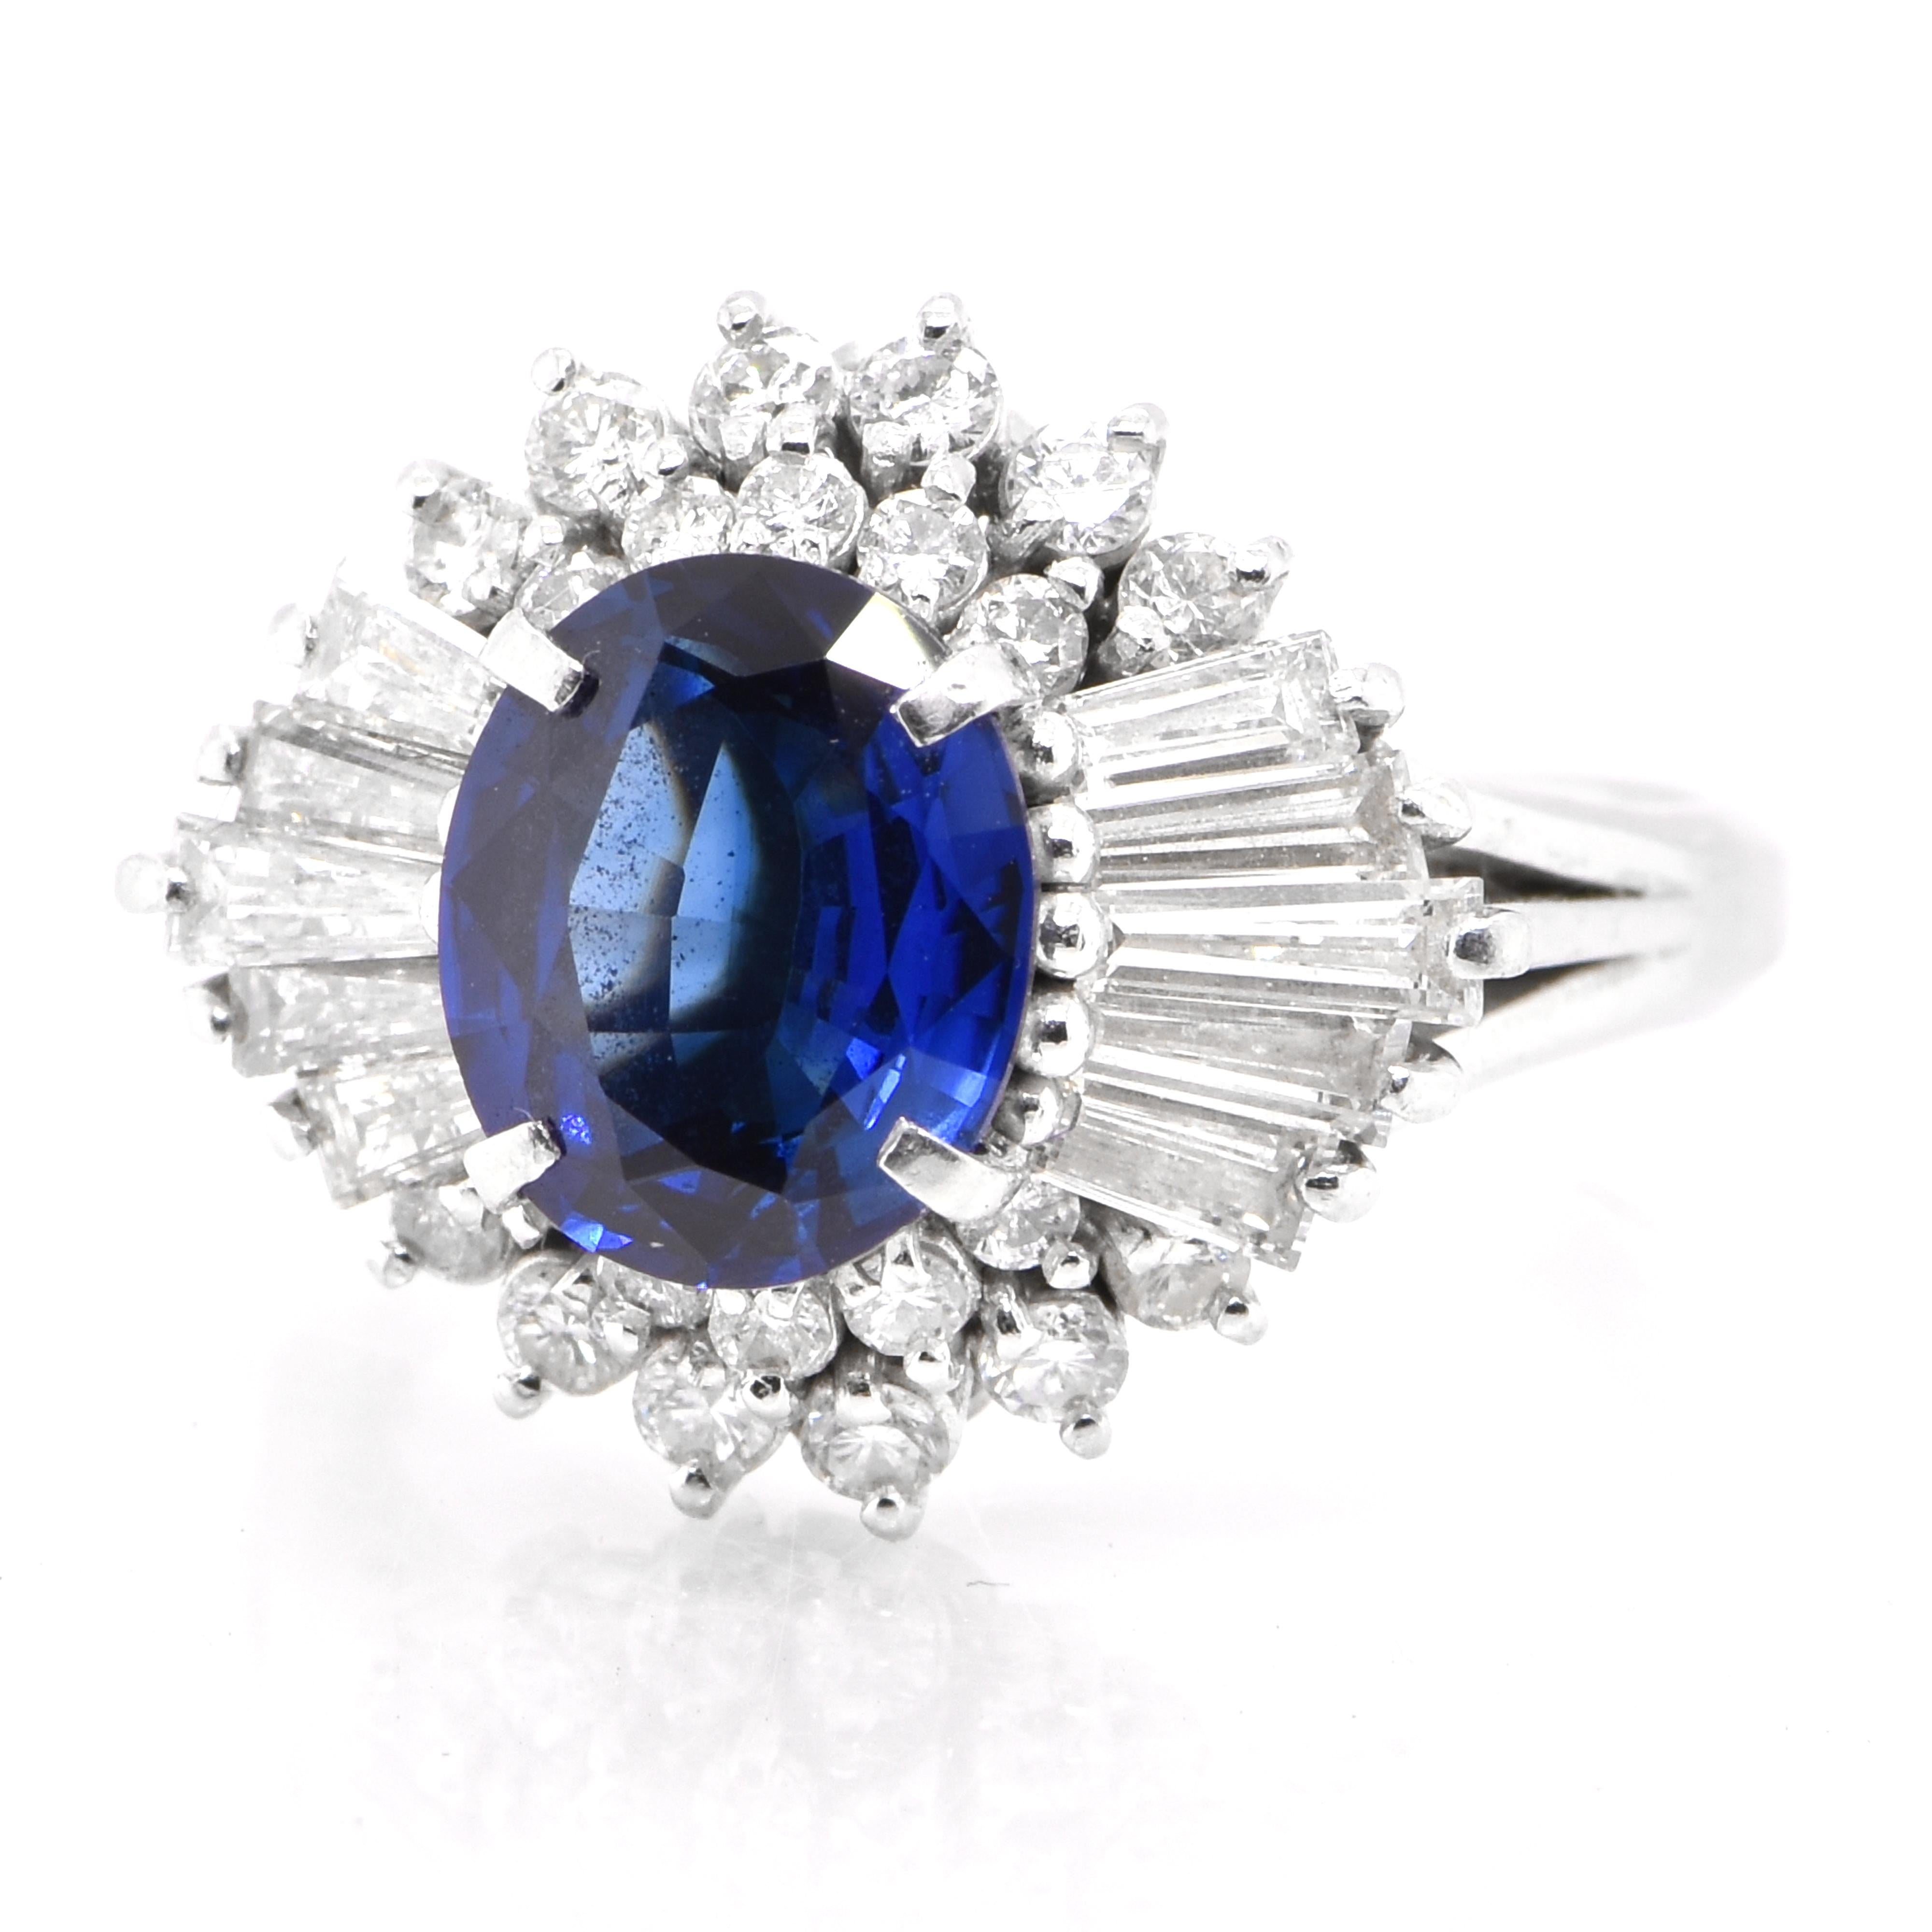 A beautiful ring featuring 1.92 Carat Natural Blue Sapphire and 1.02 Carats Diamond Accents set in Platinum. Sapphires have extraordinary durability - they excel in hardness as well as toughness and durability making them very popular in jewelry.